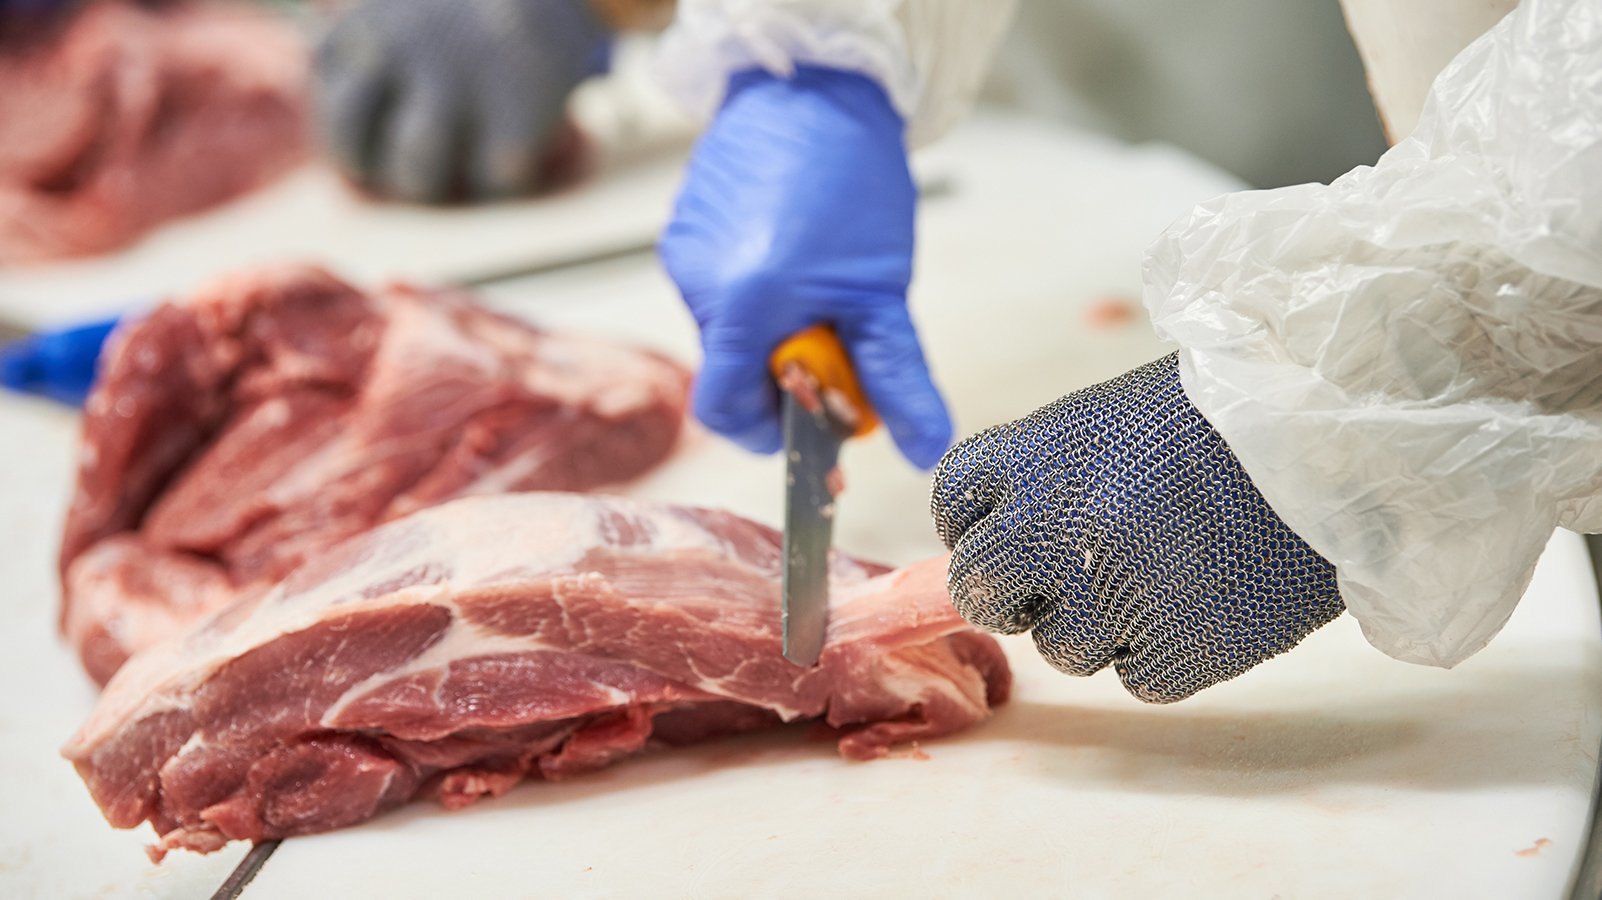 Plant-Based Protein Industry Will 'Eat Into' Meat Demand, Admits Cargill CEO